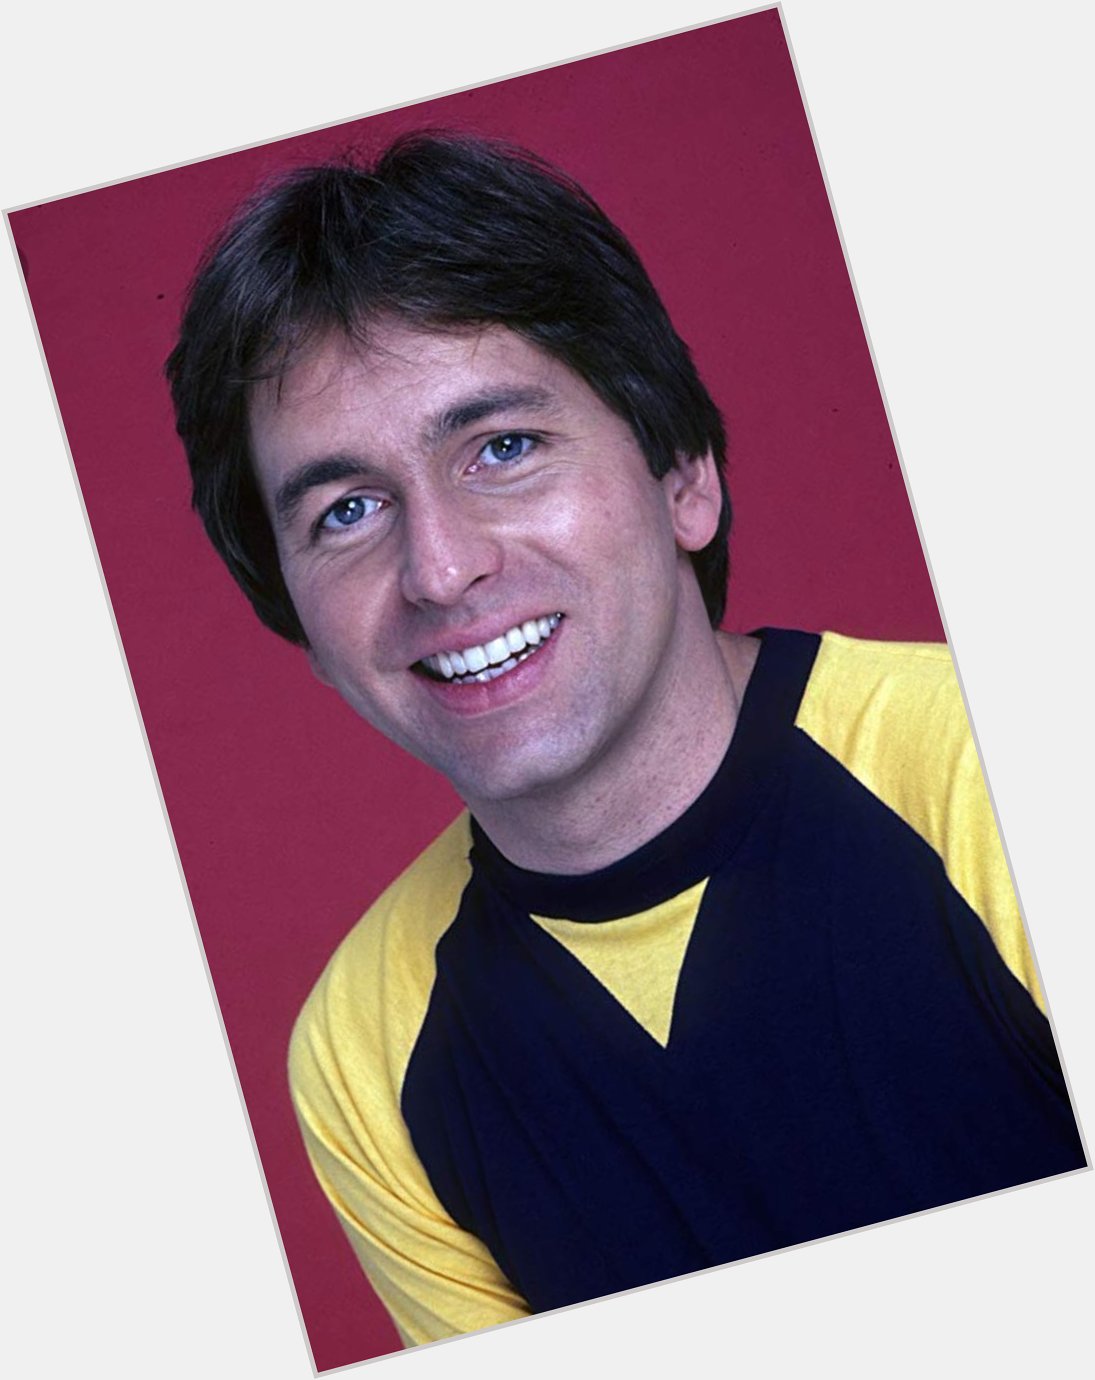 Happy Birthday to the incredible, outstanding, hilarious, kind, talented, amazing John Ritter. 